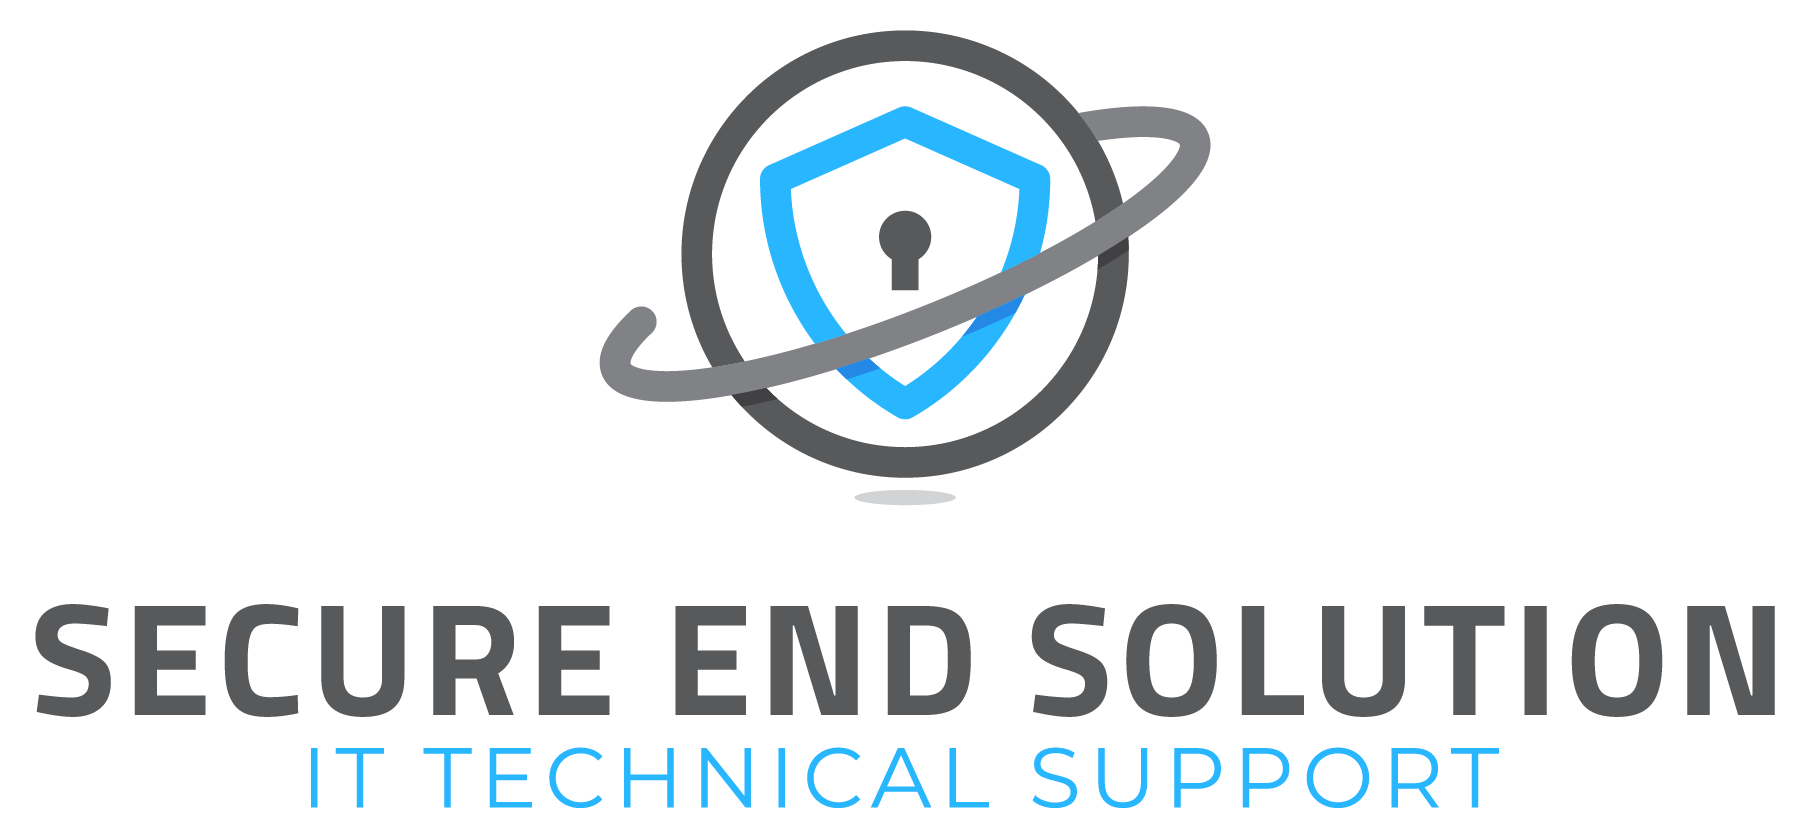 Secure End Solution Inc profile on Qualified.One